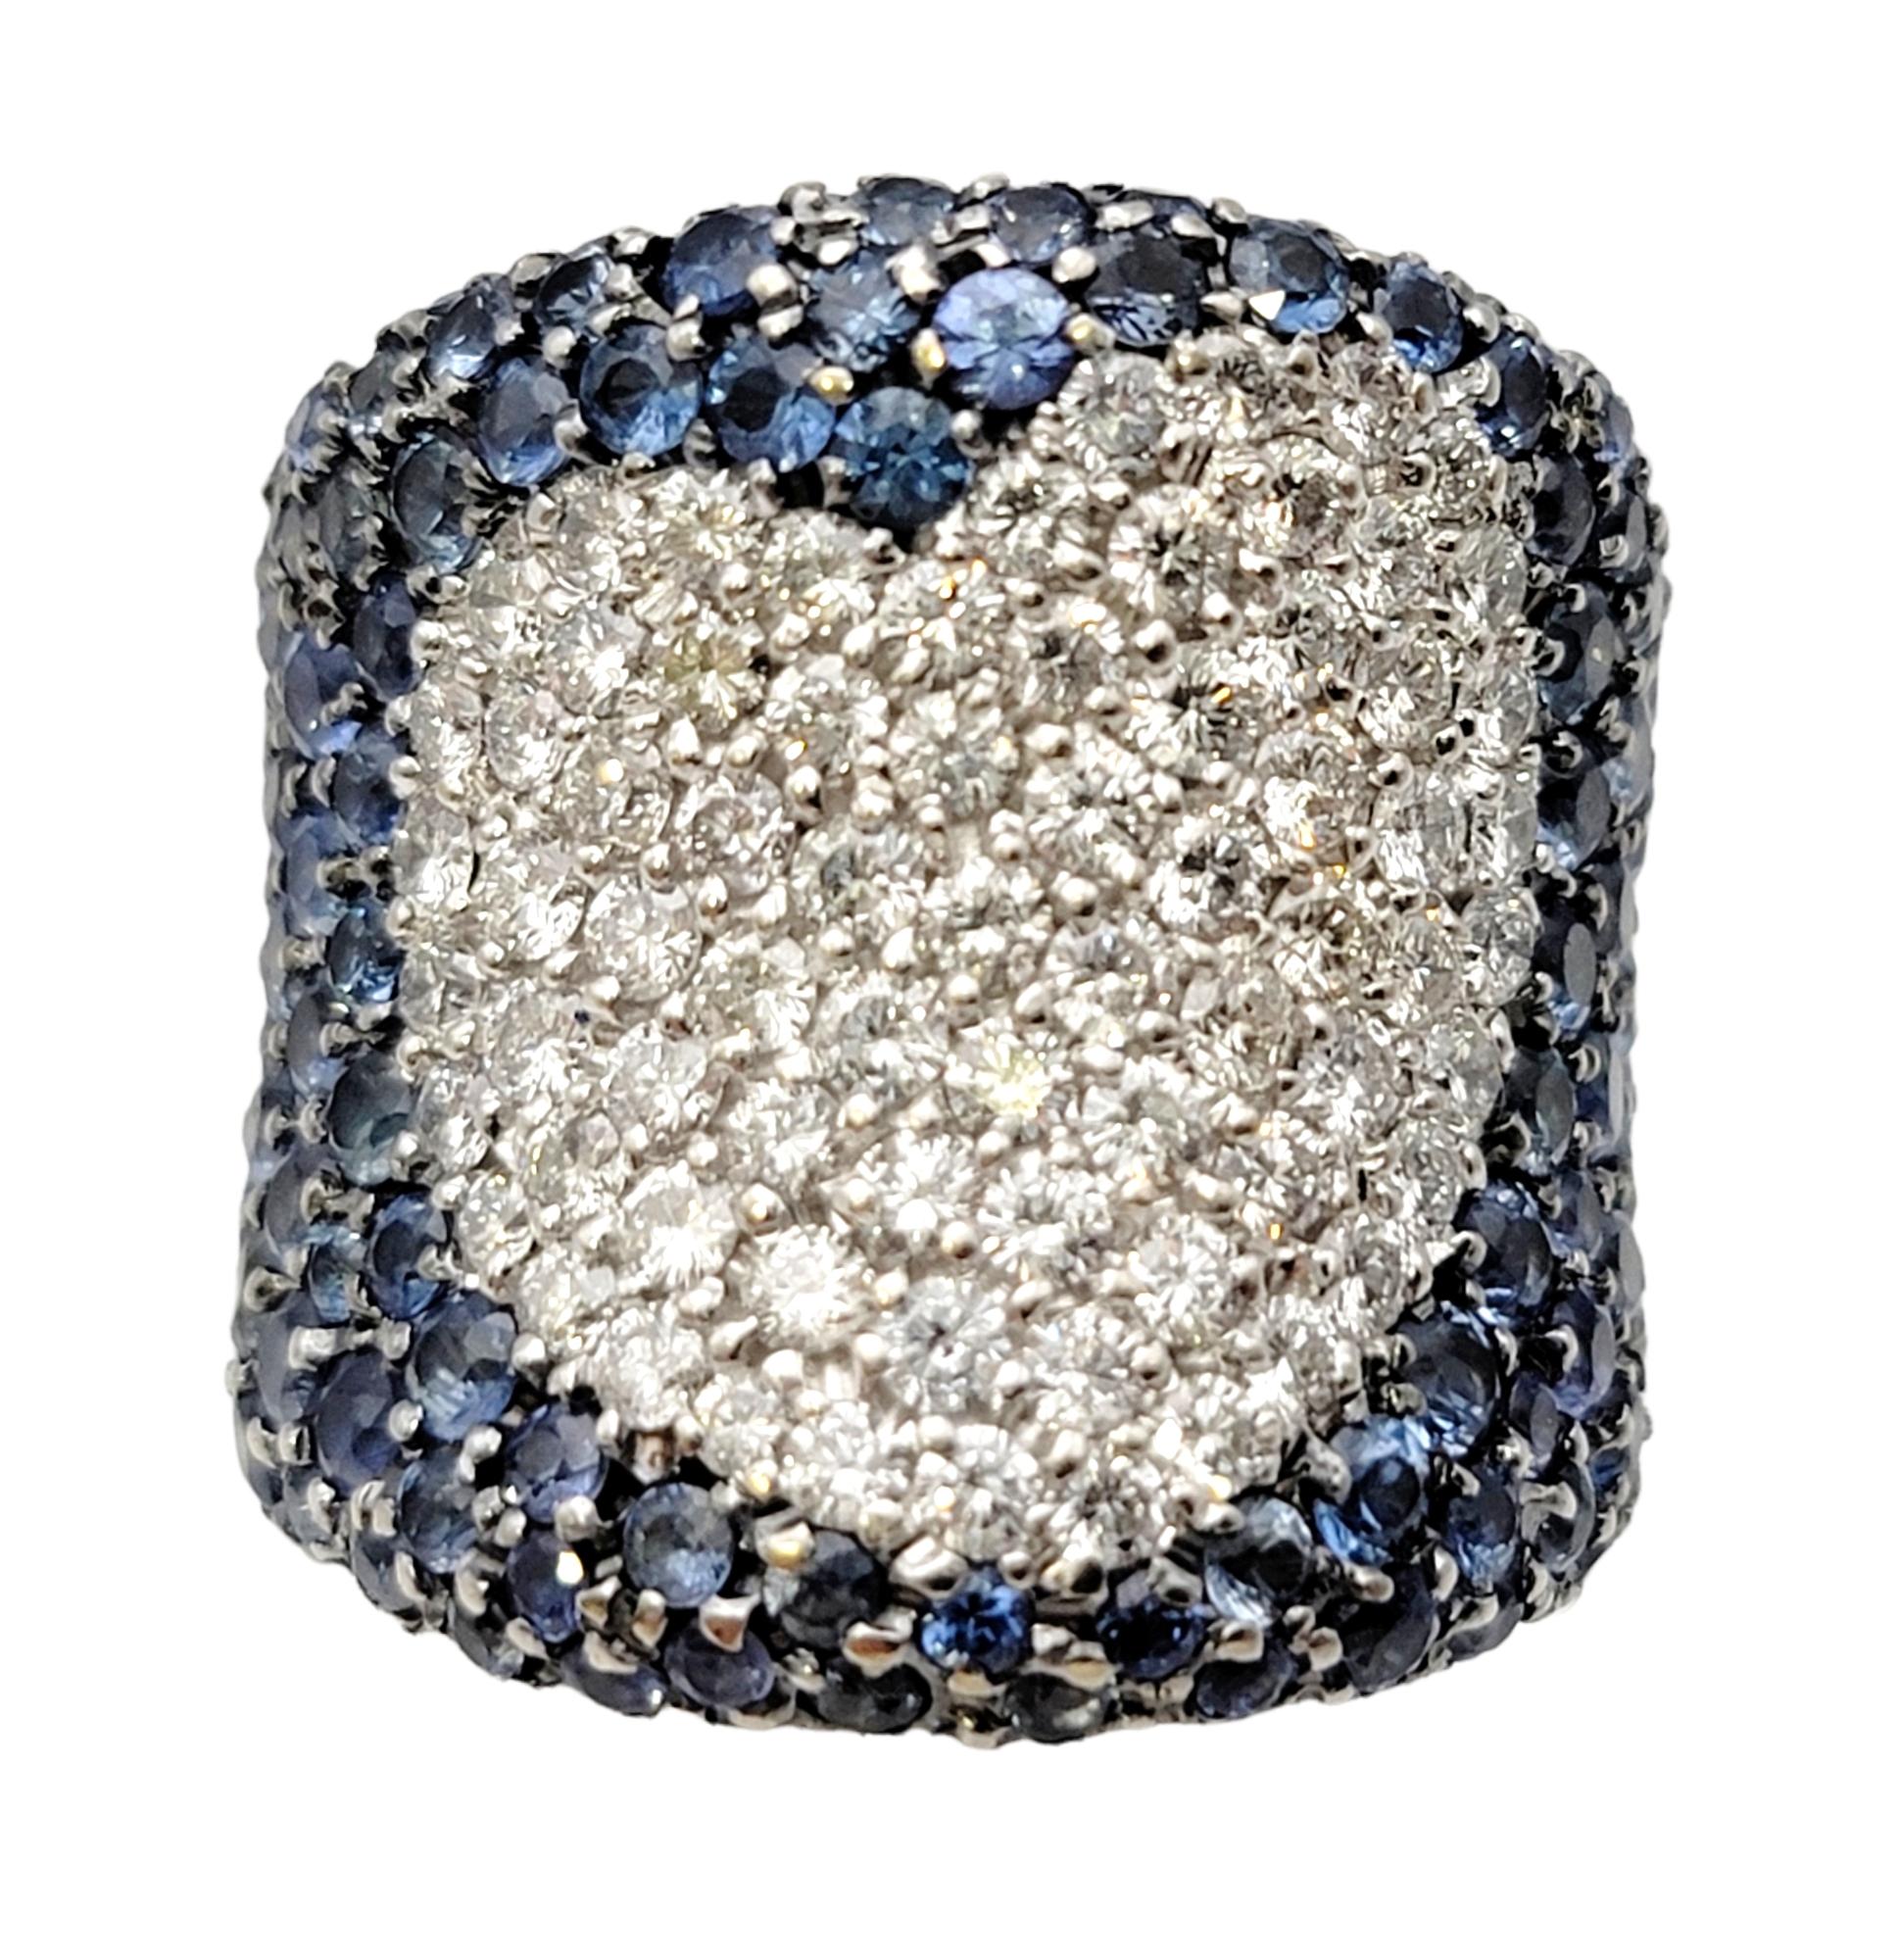 Ring size: 6.25

This is an absolutely sensational sapphire and diamond band ring that fills the finger with dazzling design. The ring is super sparkly, with a wide, sleek contoured design, making the natural stones shimmer and shine from all